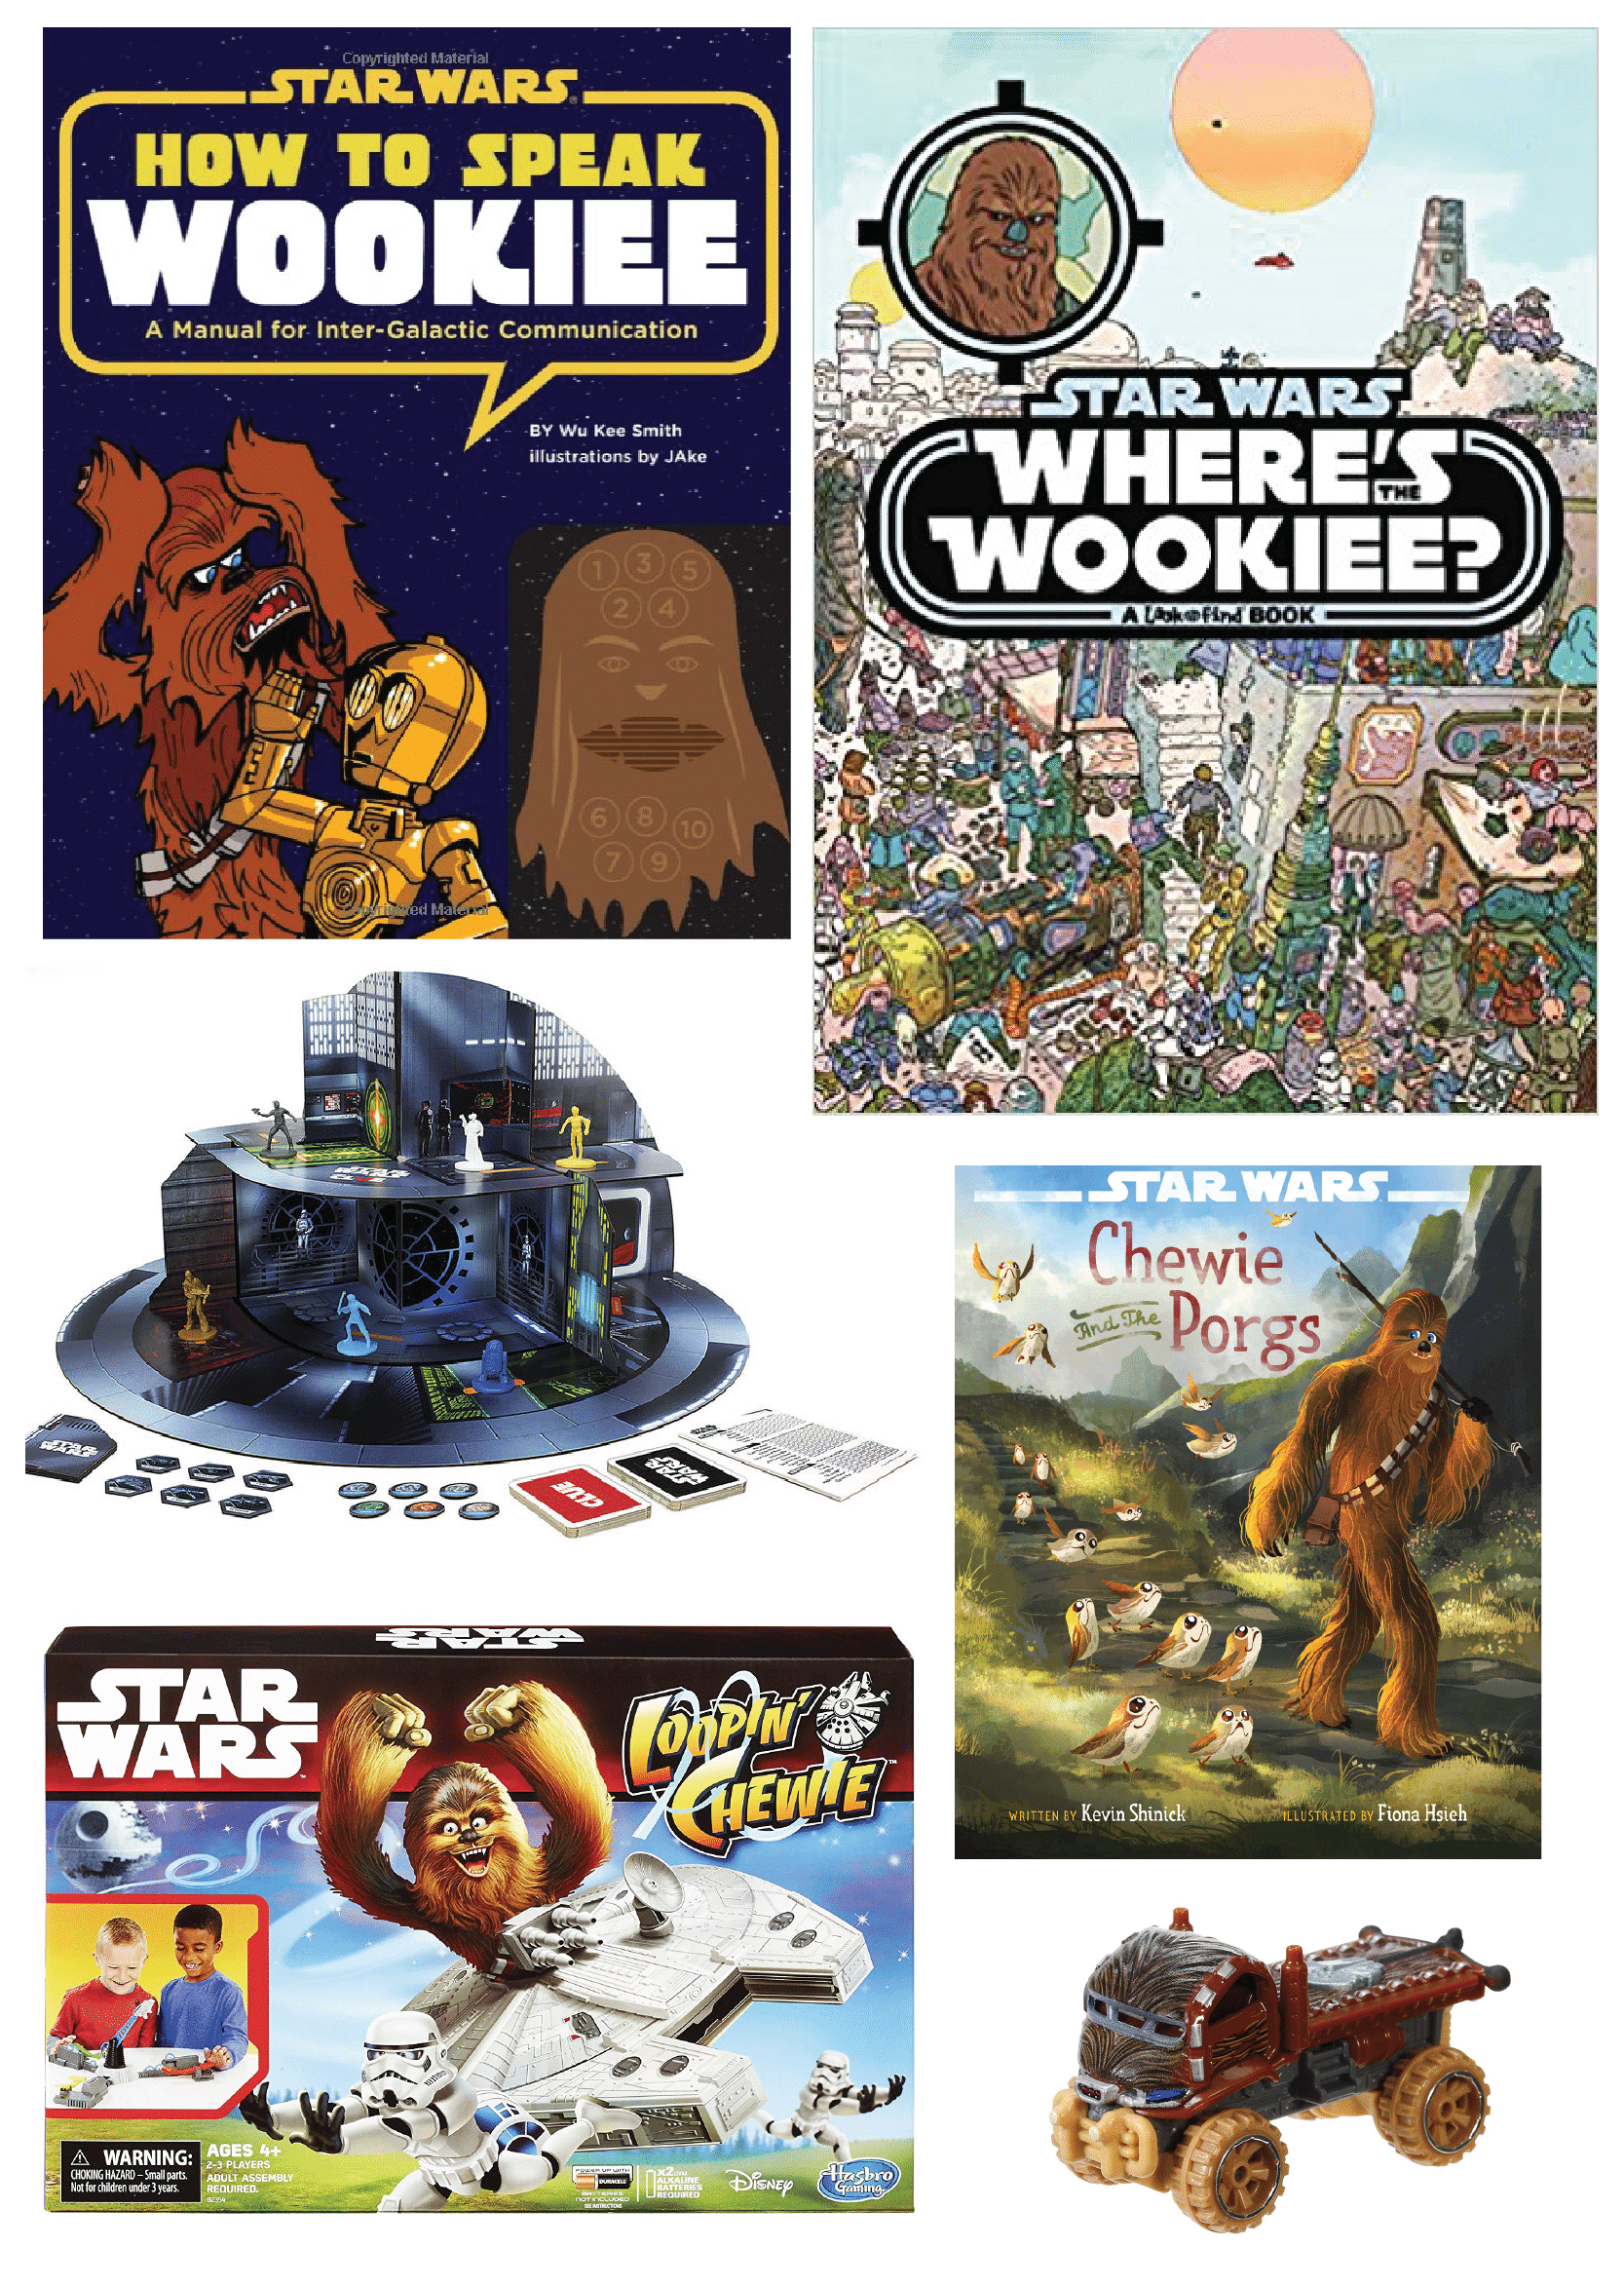 https://www.playpartyplan.com/wp-content/uploads/2018/02/CHEWBACCA-BOOKS-GAMES-01.png